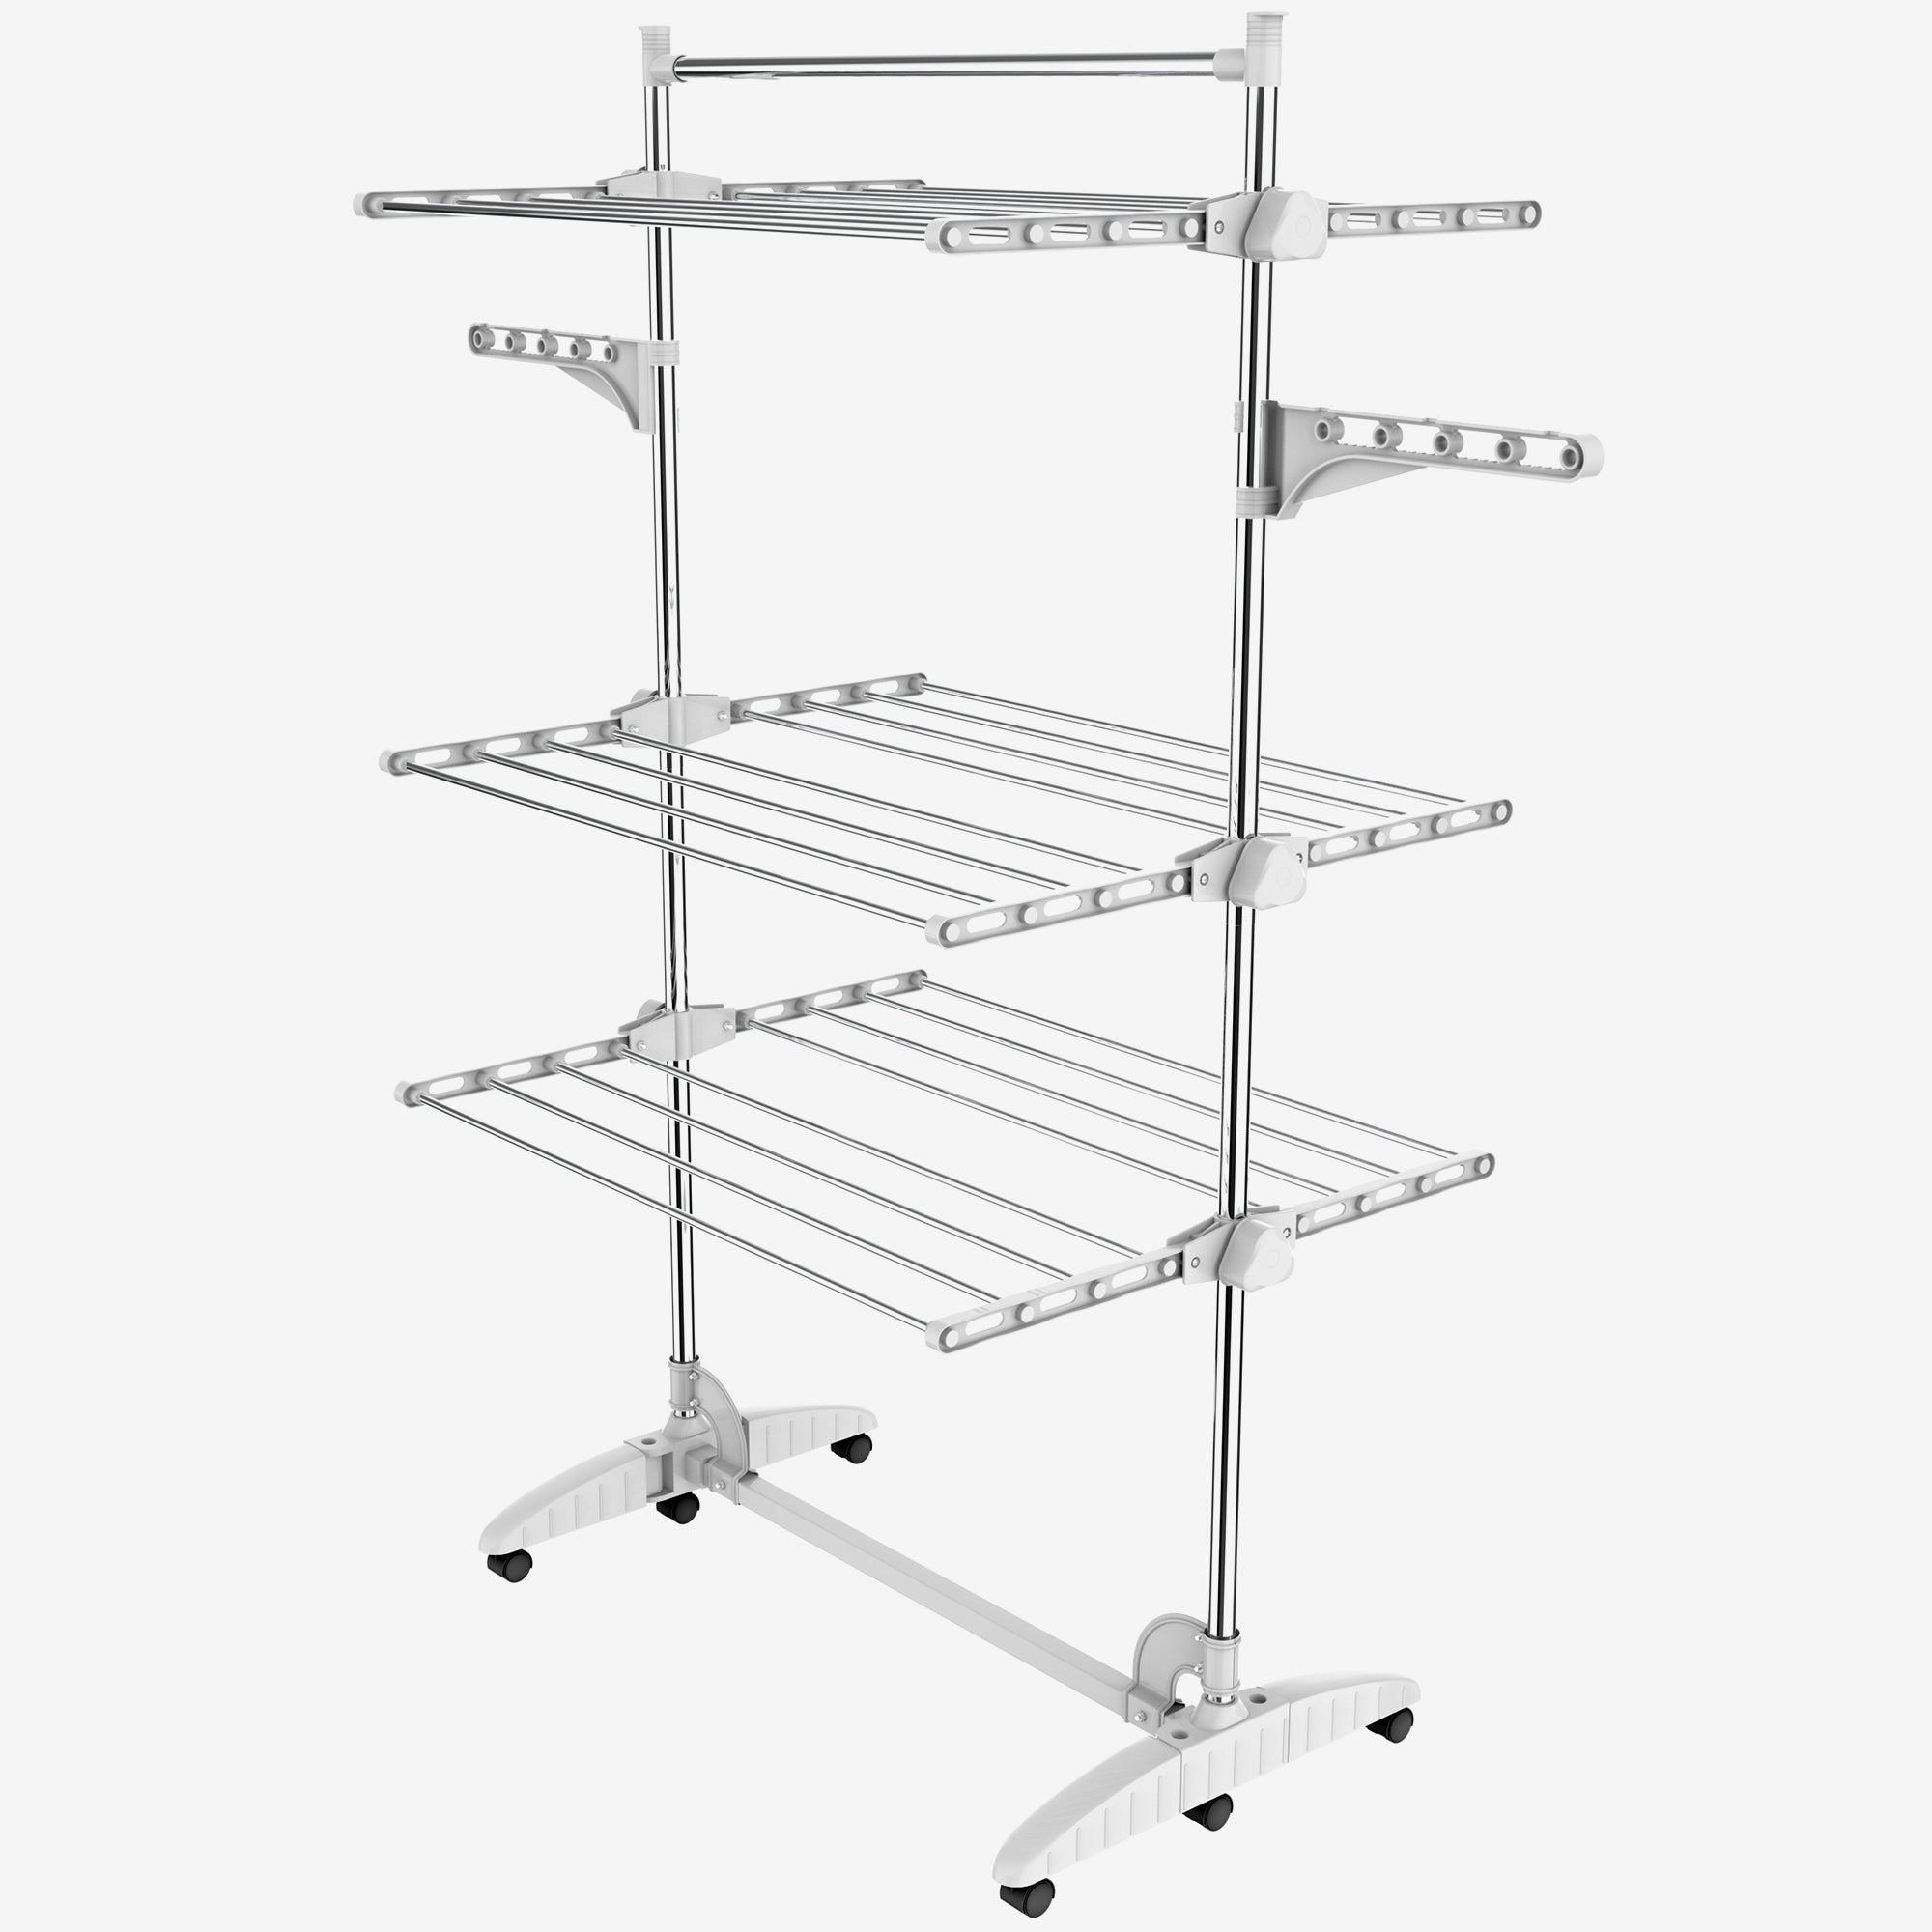 Clothes-Drying-Rack-3-shelves-with-top-bar-White-Clothes-Drying-Rack-3-shelves-White-with-wings-and-top-bar-Material-Stainless-steel-tubes